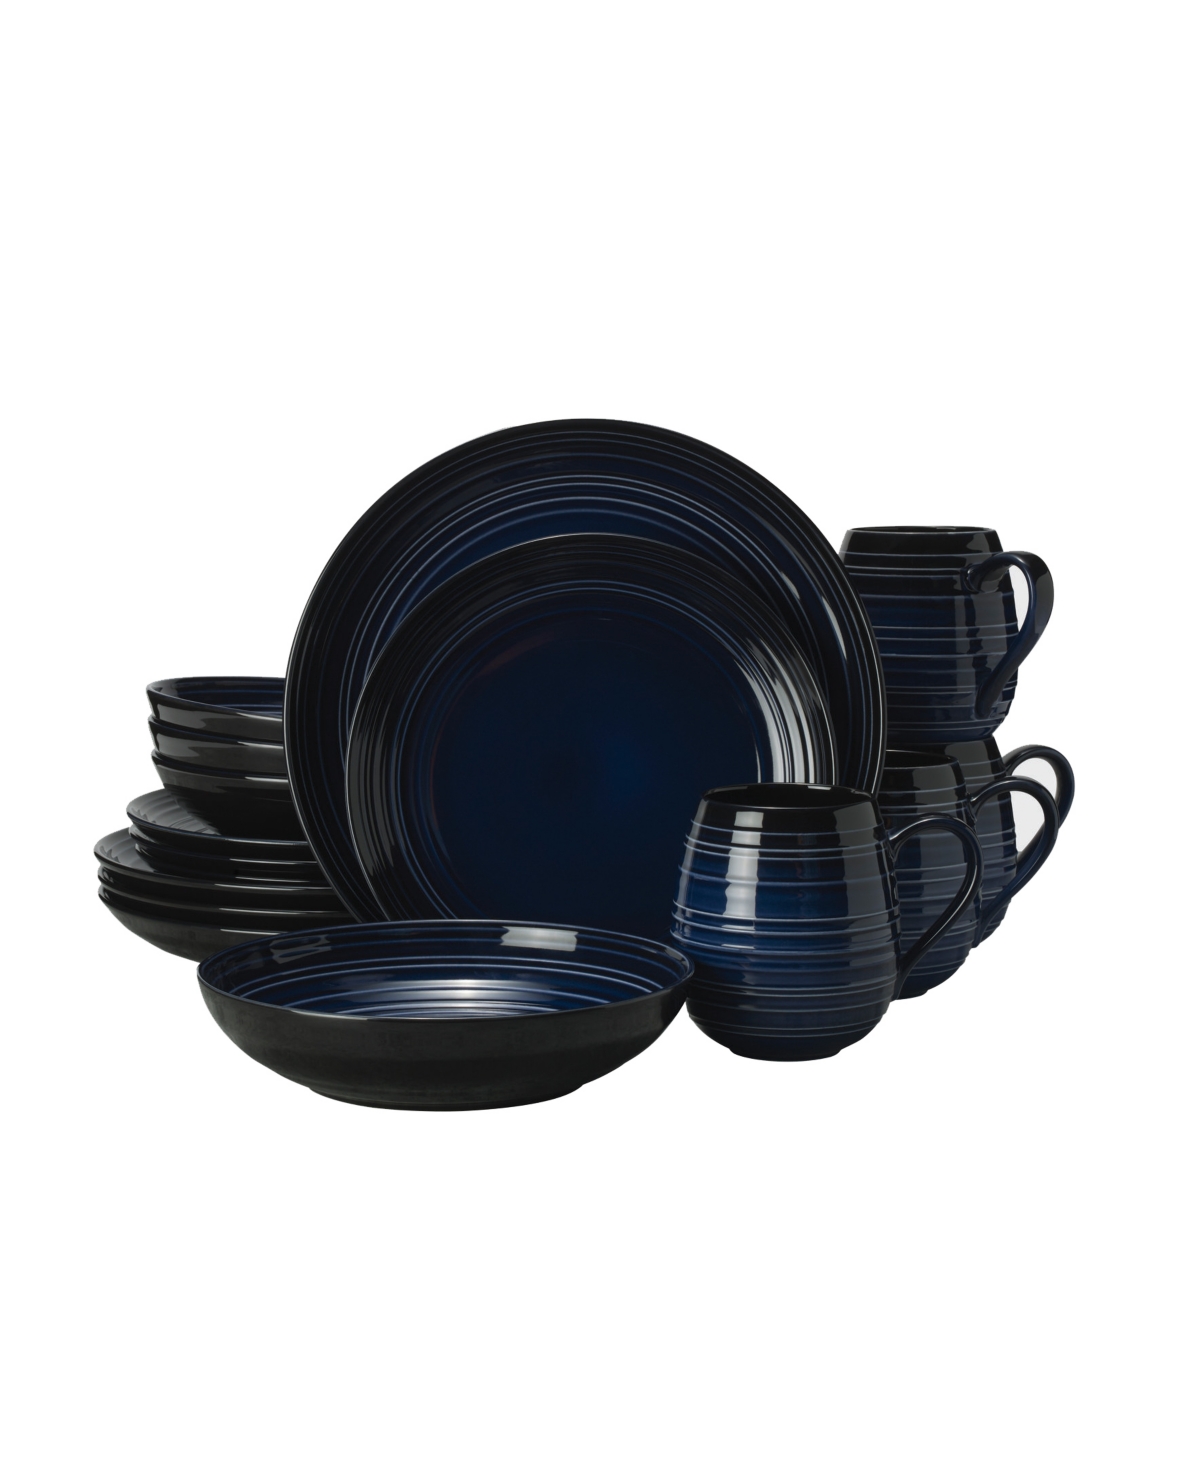 Swirl Coupe 16 Piece Dinnerware Set, Service for 4 - Blue